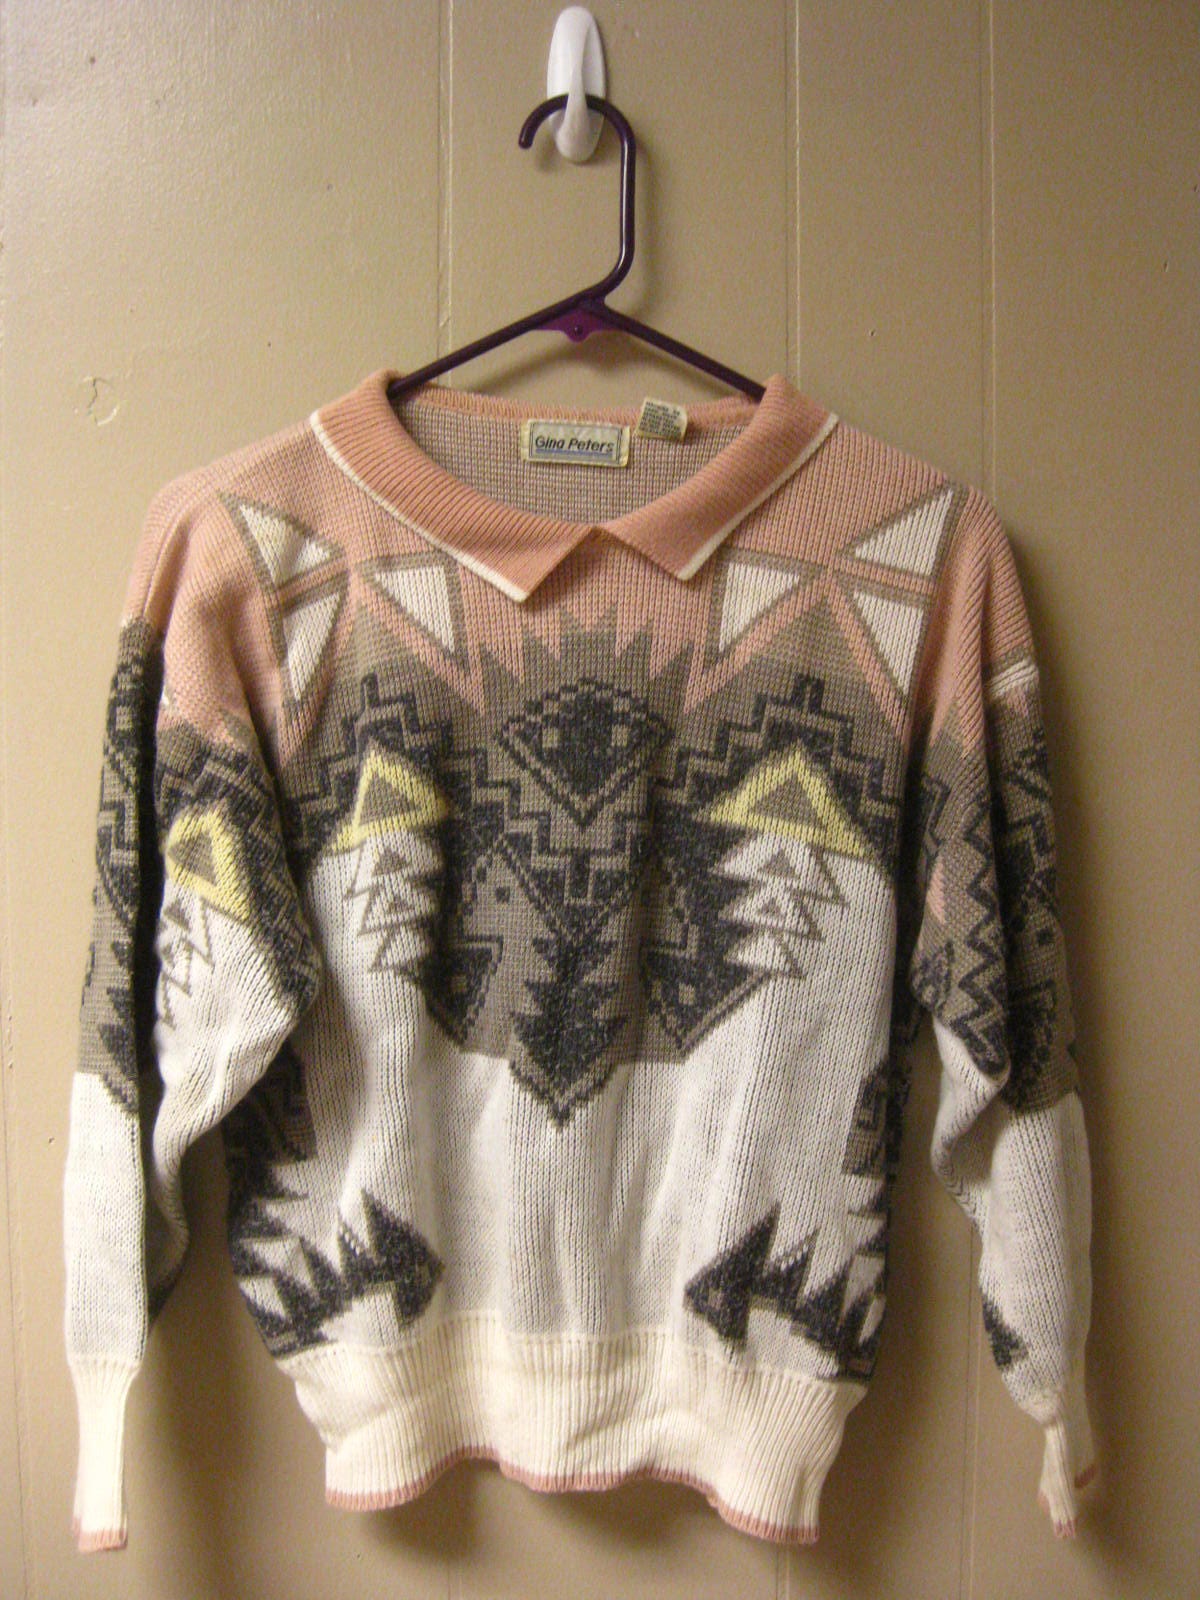 GINA PETERS AZTEC Sweater - Women's Clothing